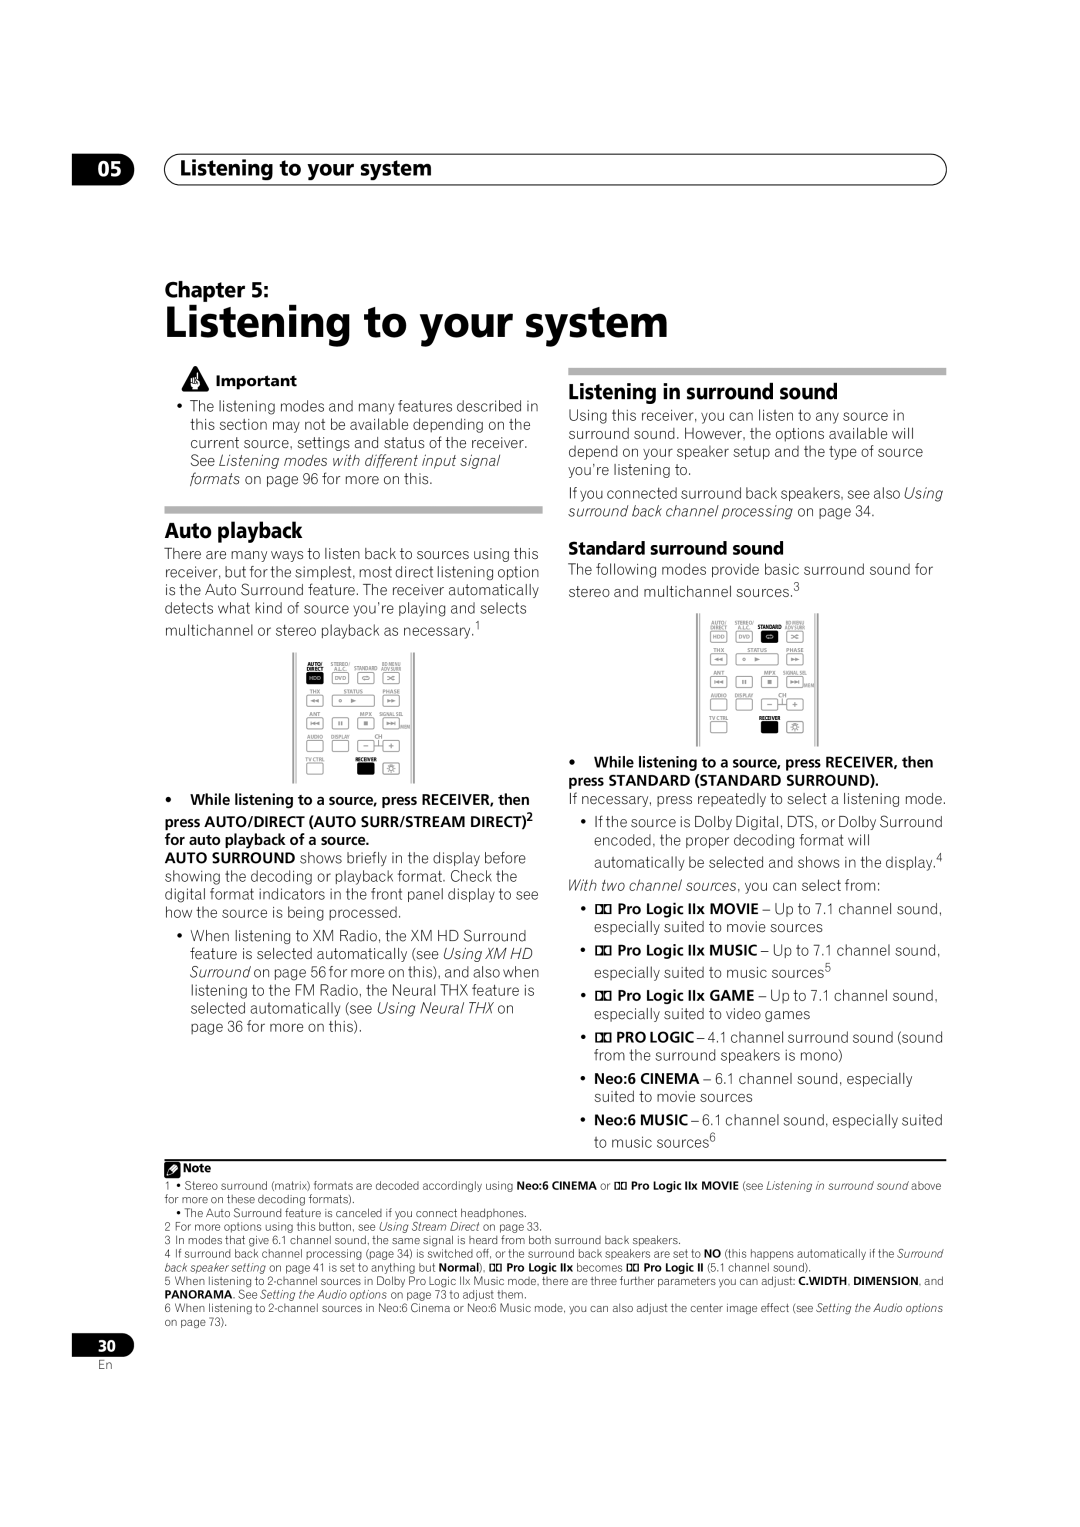 Pioneer VSX-01TXH manual 05Listening to your system Chapter, Listening in surround sound, Auto playback 